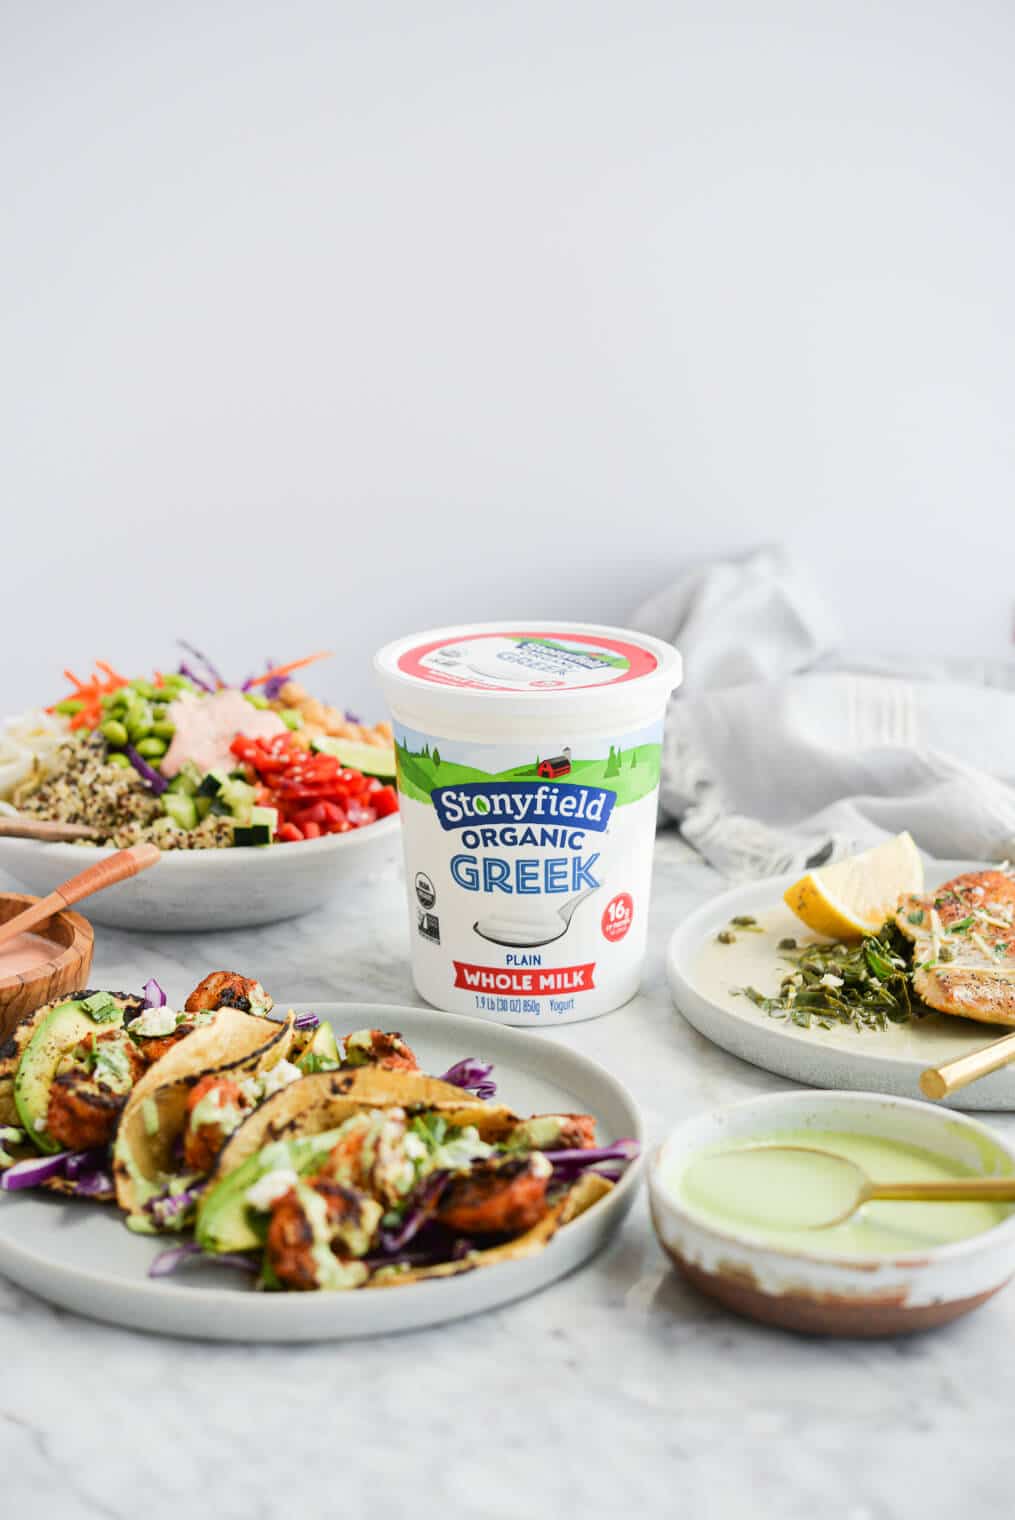 a thai red curry buddha bowl, three shrimp tacos, and a plate of creamy chicken piccata all surrounding a quart of Stonyfield's plain greek yogurt